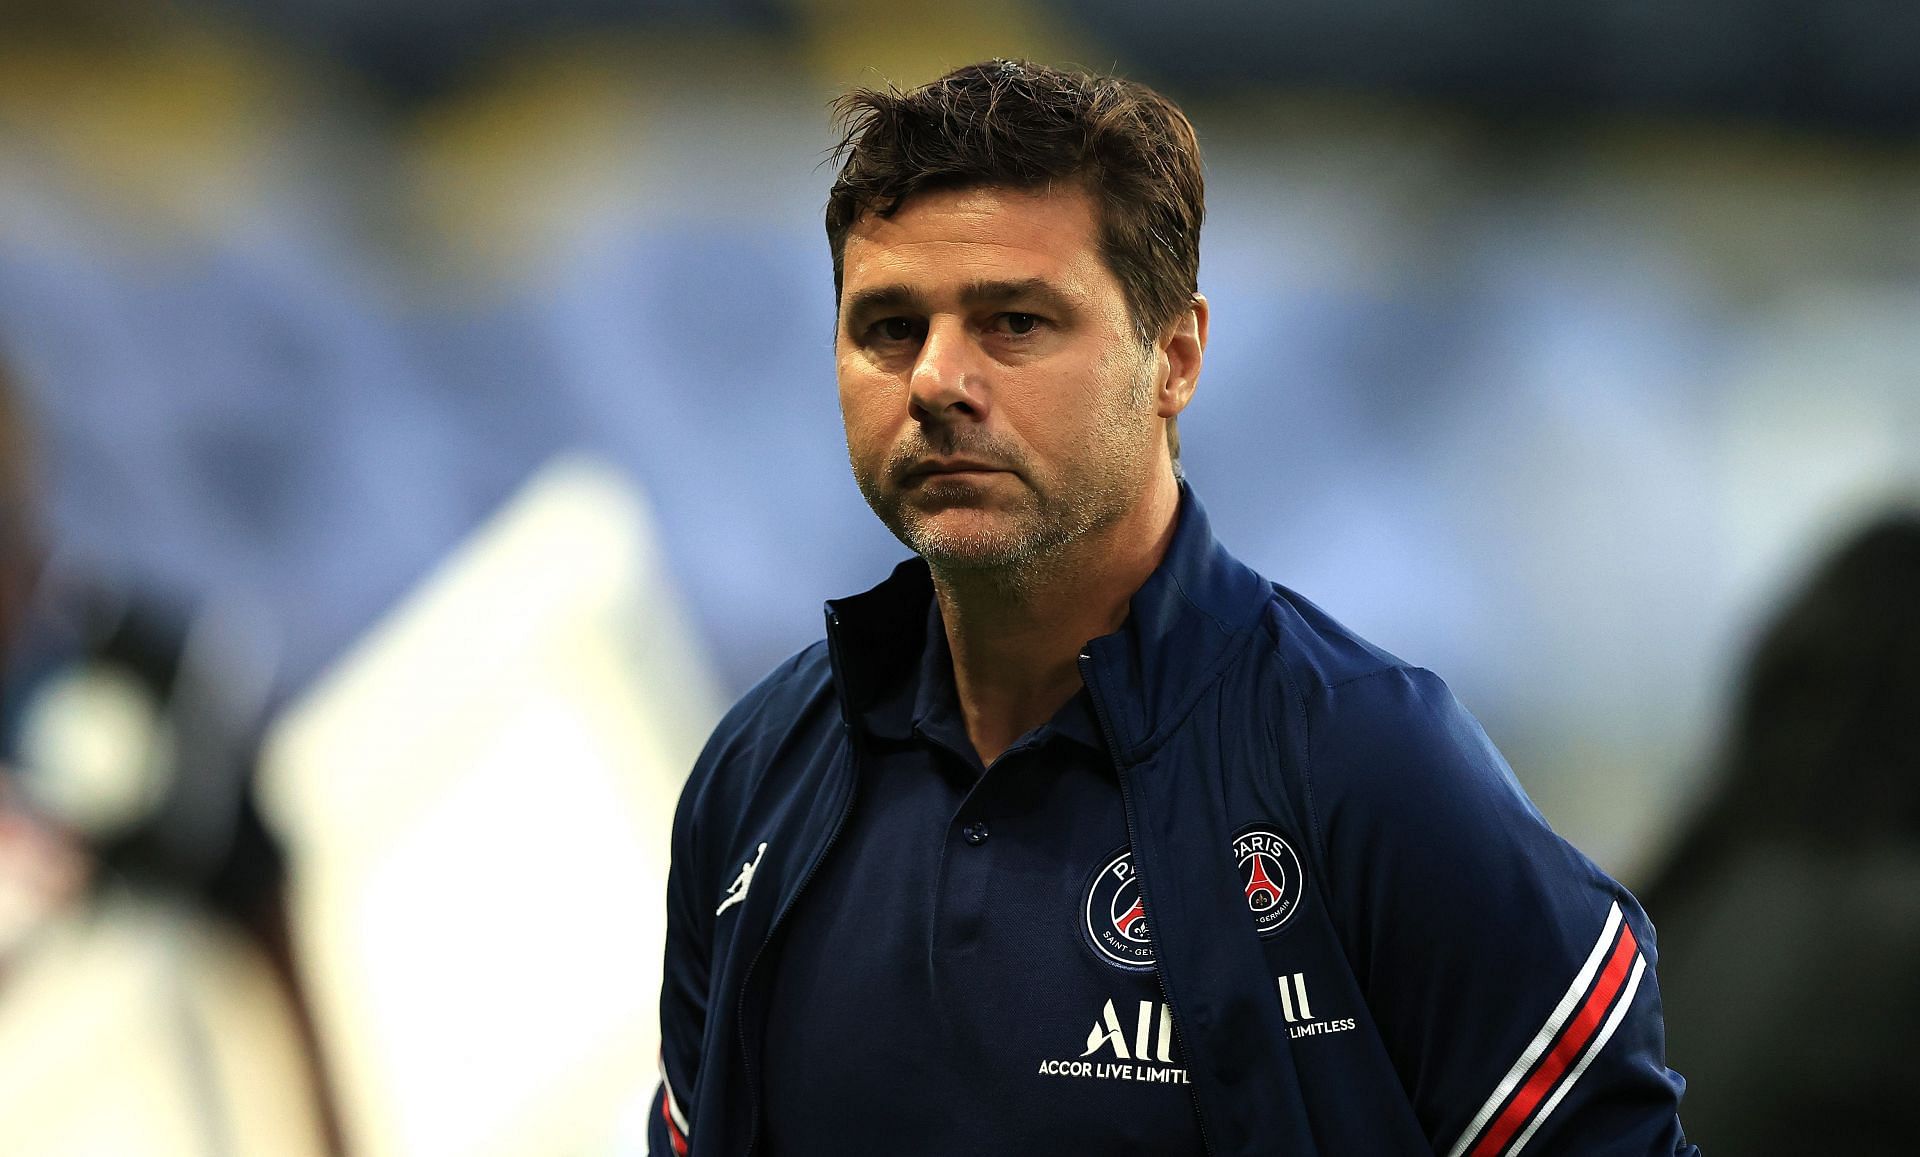 Manchester United players prefer Mauricio Pochettino as their next manager.